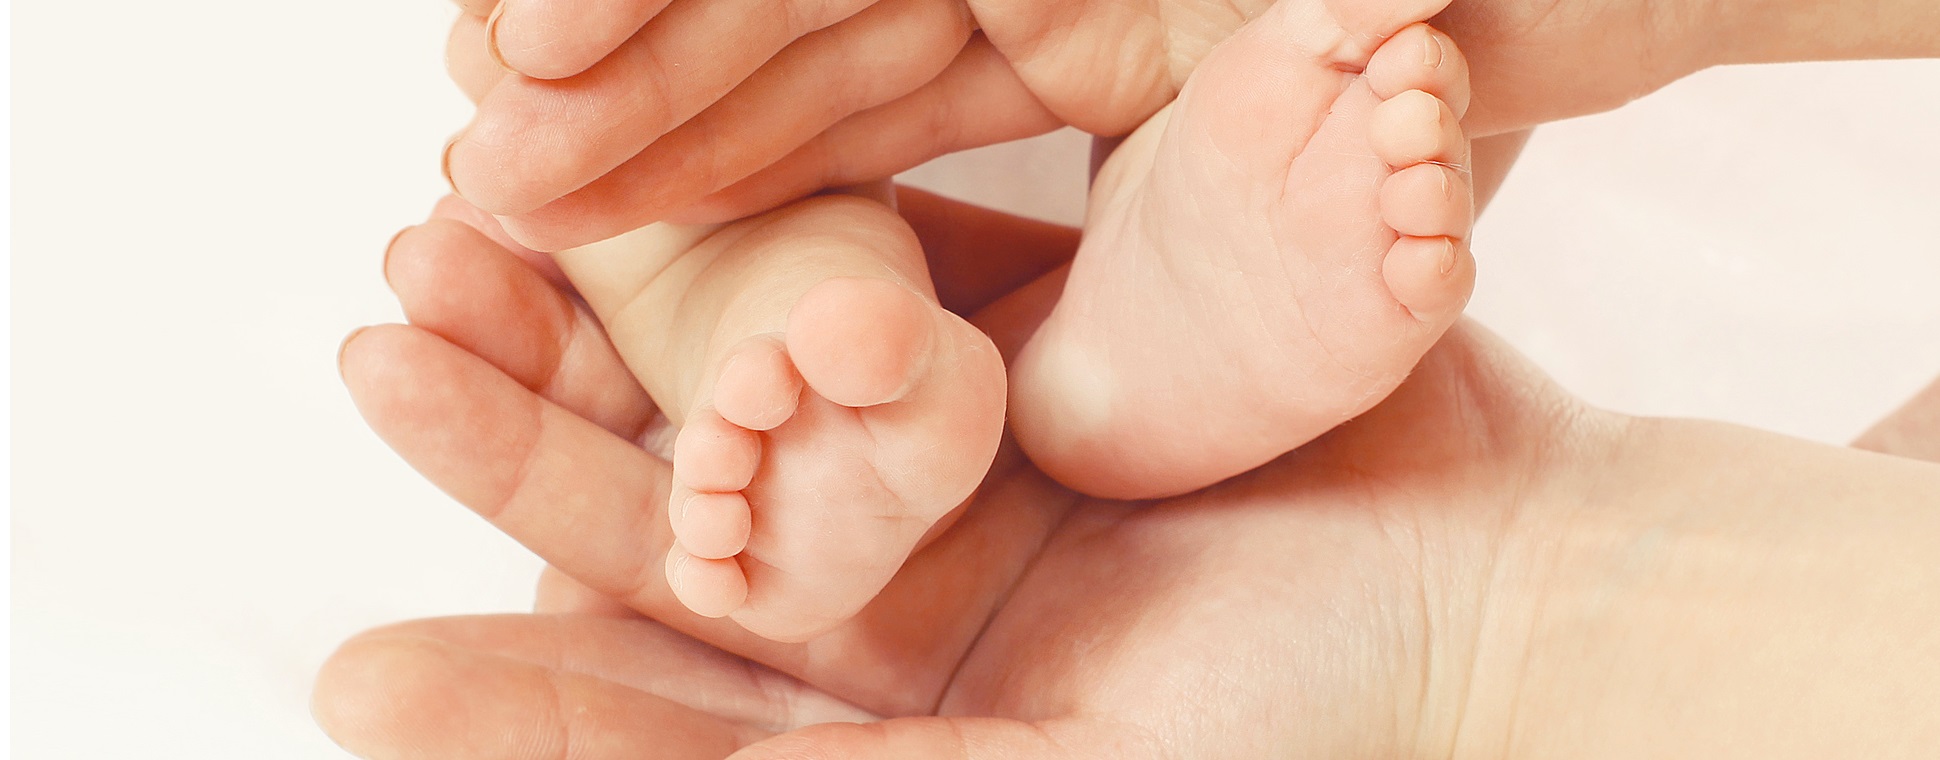 Close up short of adult female hands holding infant feets